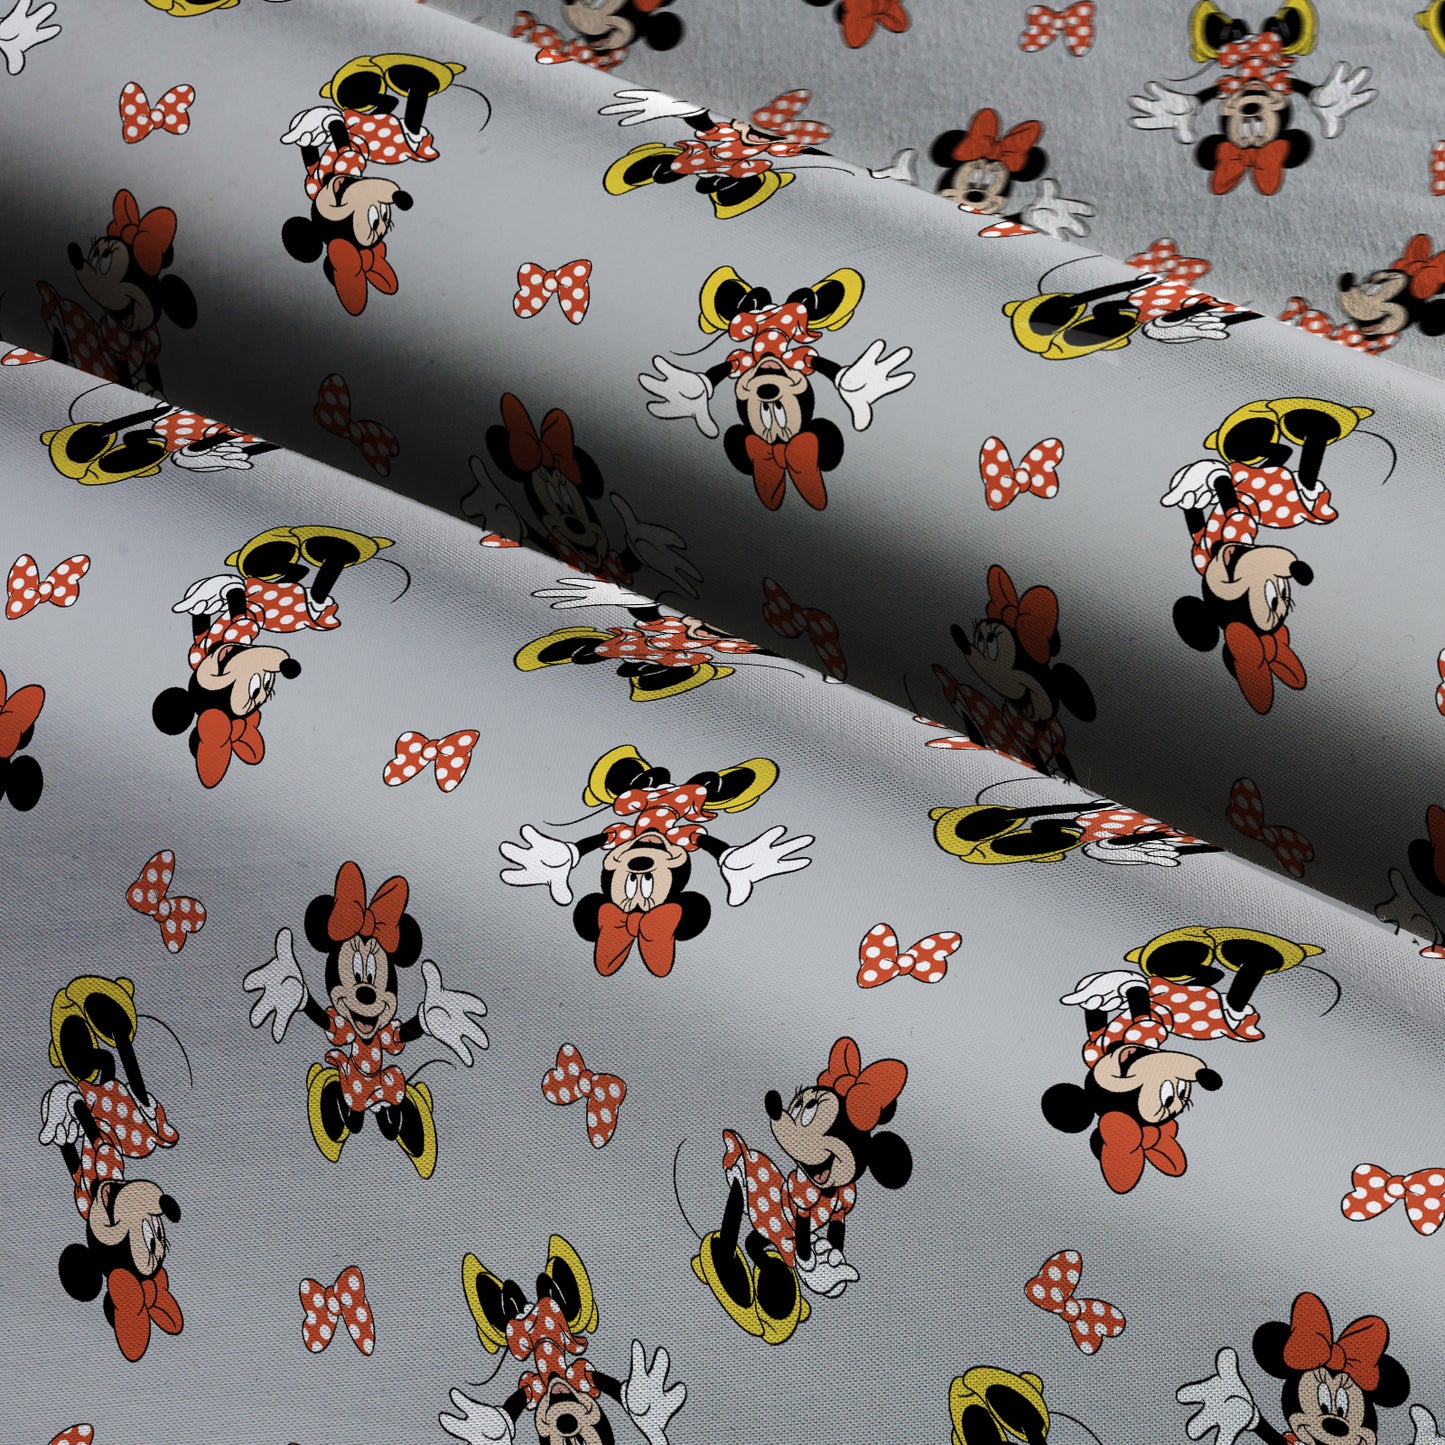 Disney Minnie Mouse Fun With Polka Dots Cotton Fabric